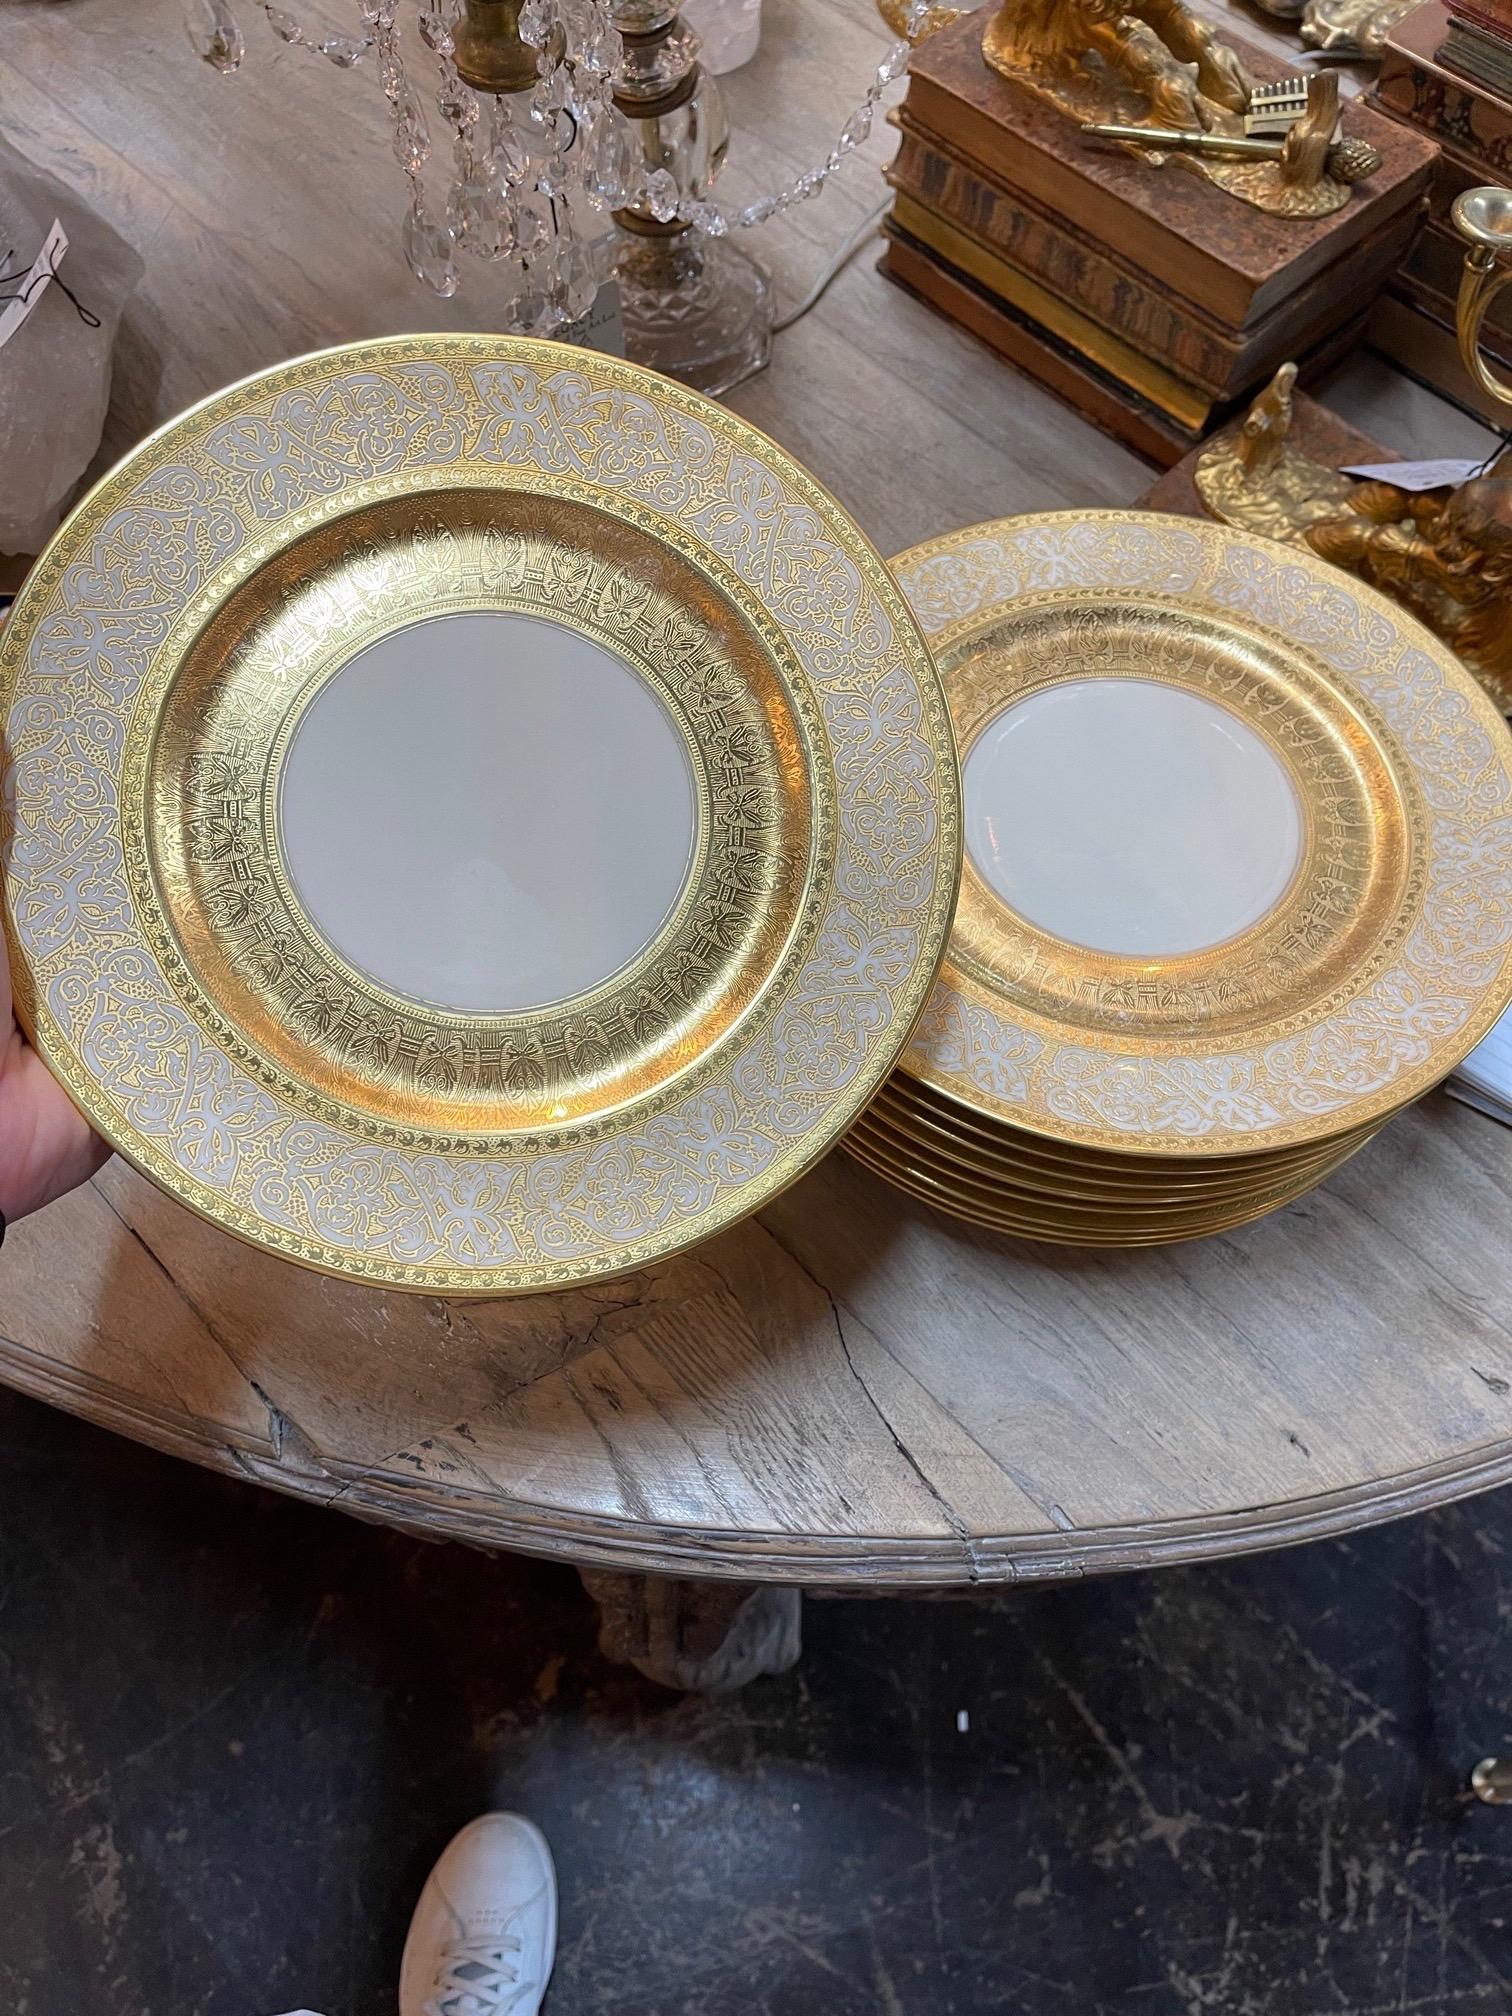 Lovely set of 10 Bavarian china gold encrusted dinner plates by Heinrich & Company. A very impressive set! Superb!.